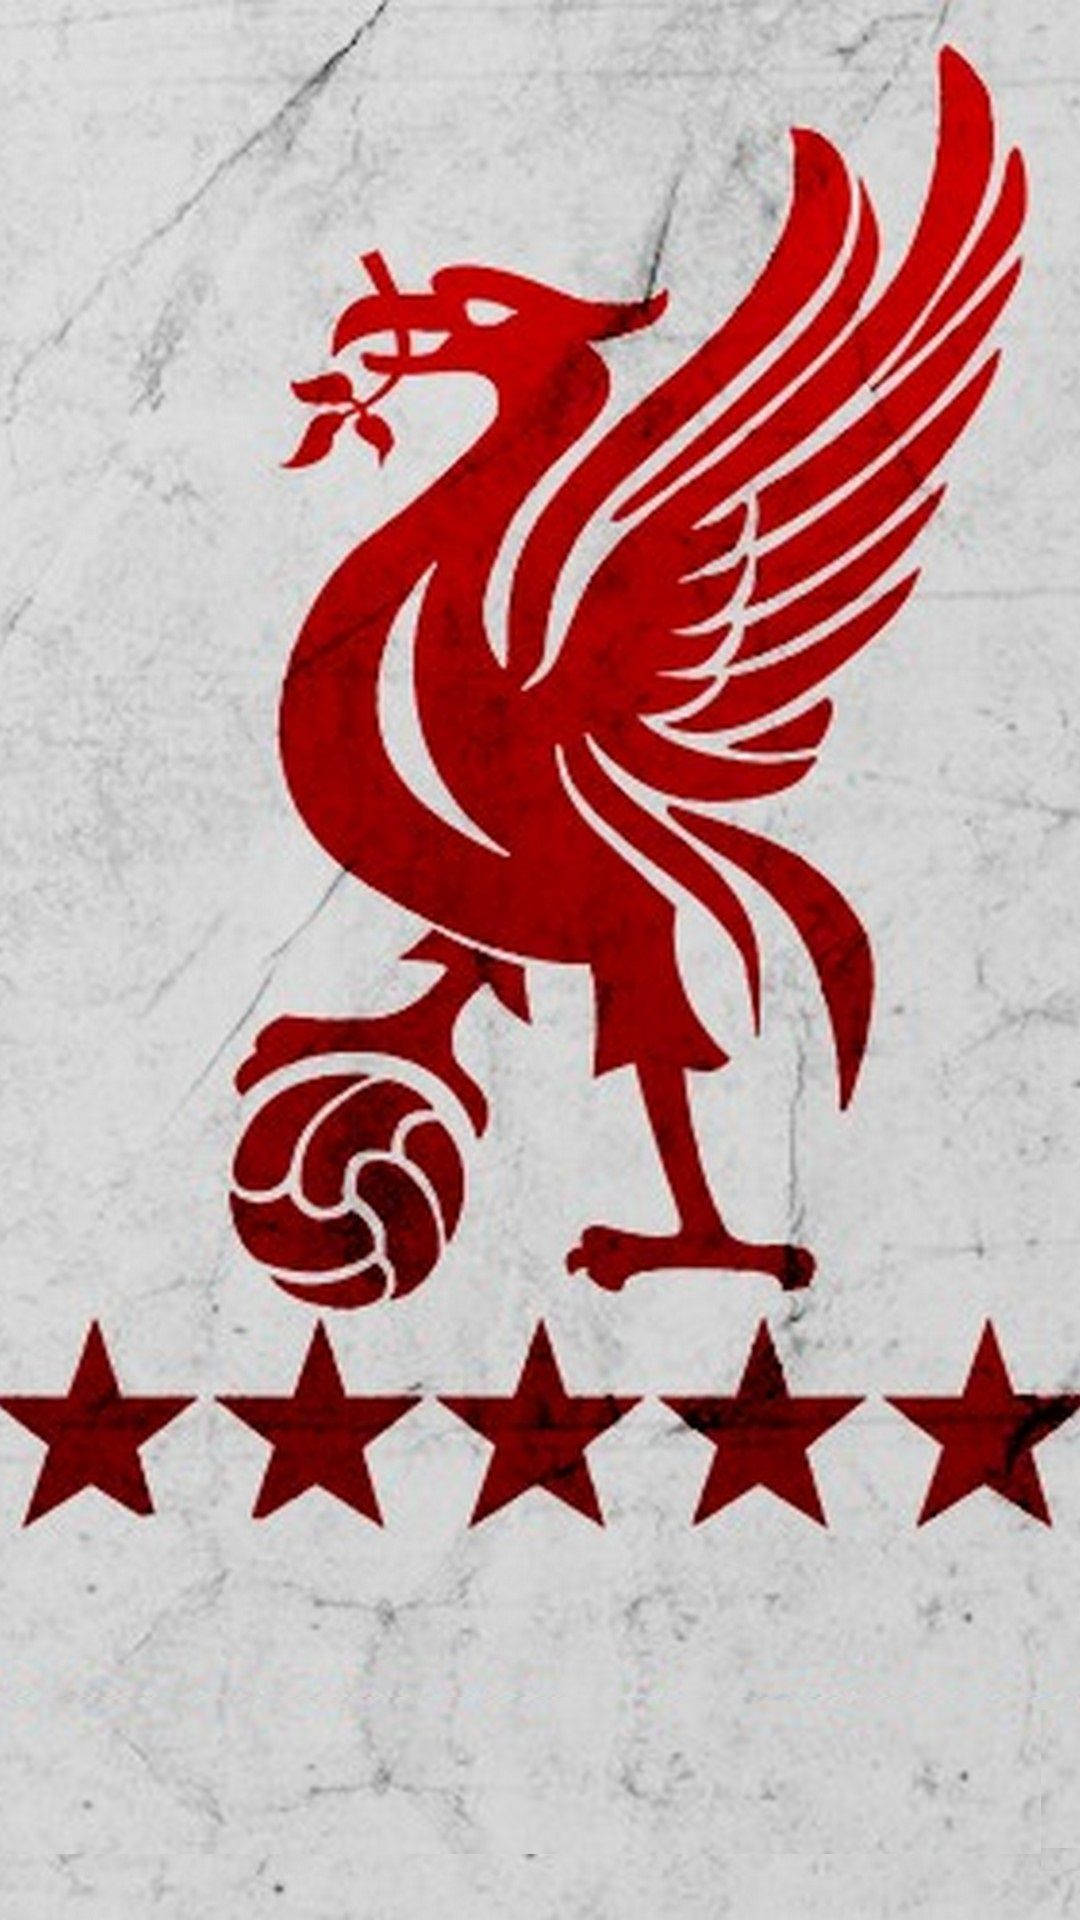 Welcome to Liverpool - the home of the Red Liver Bird Wallpaper